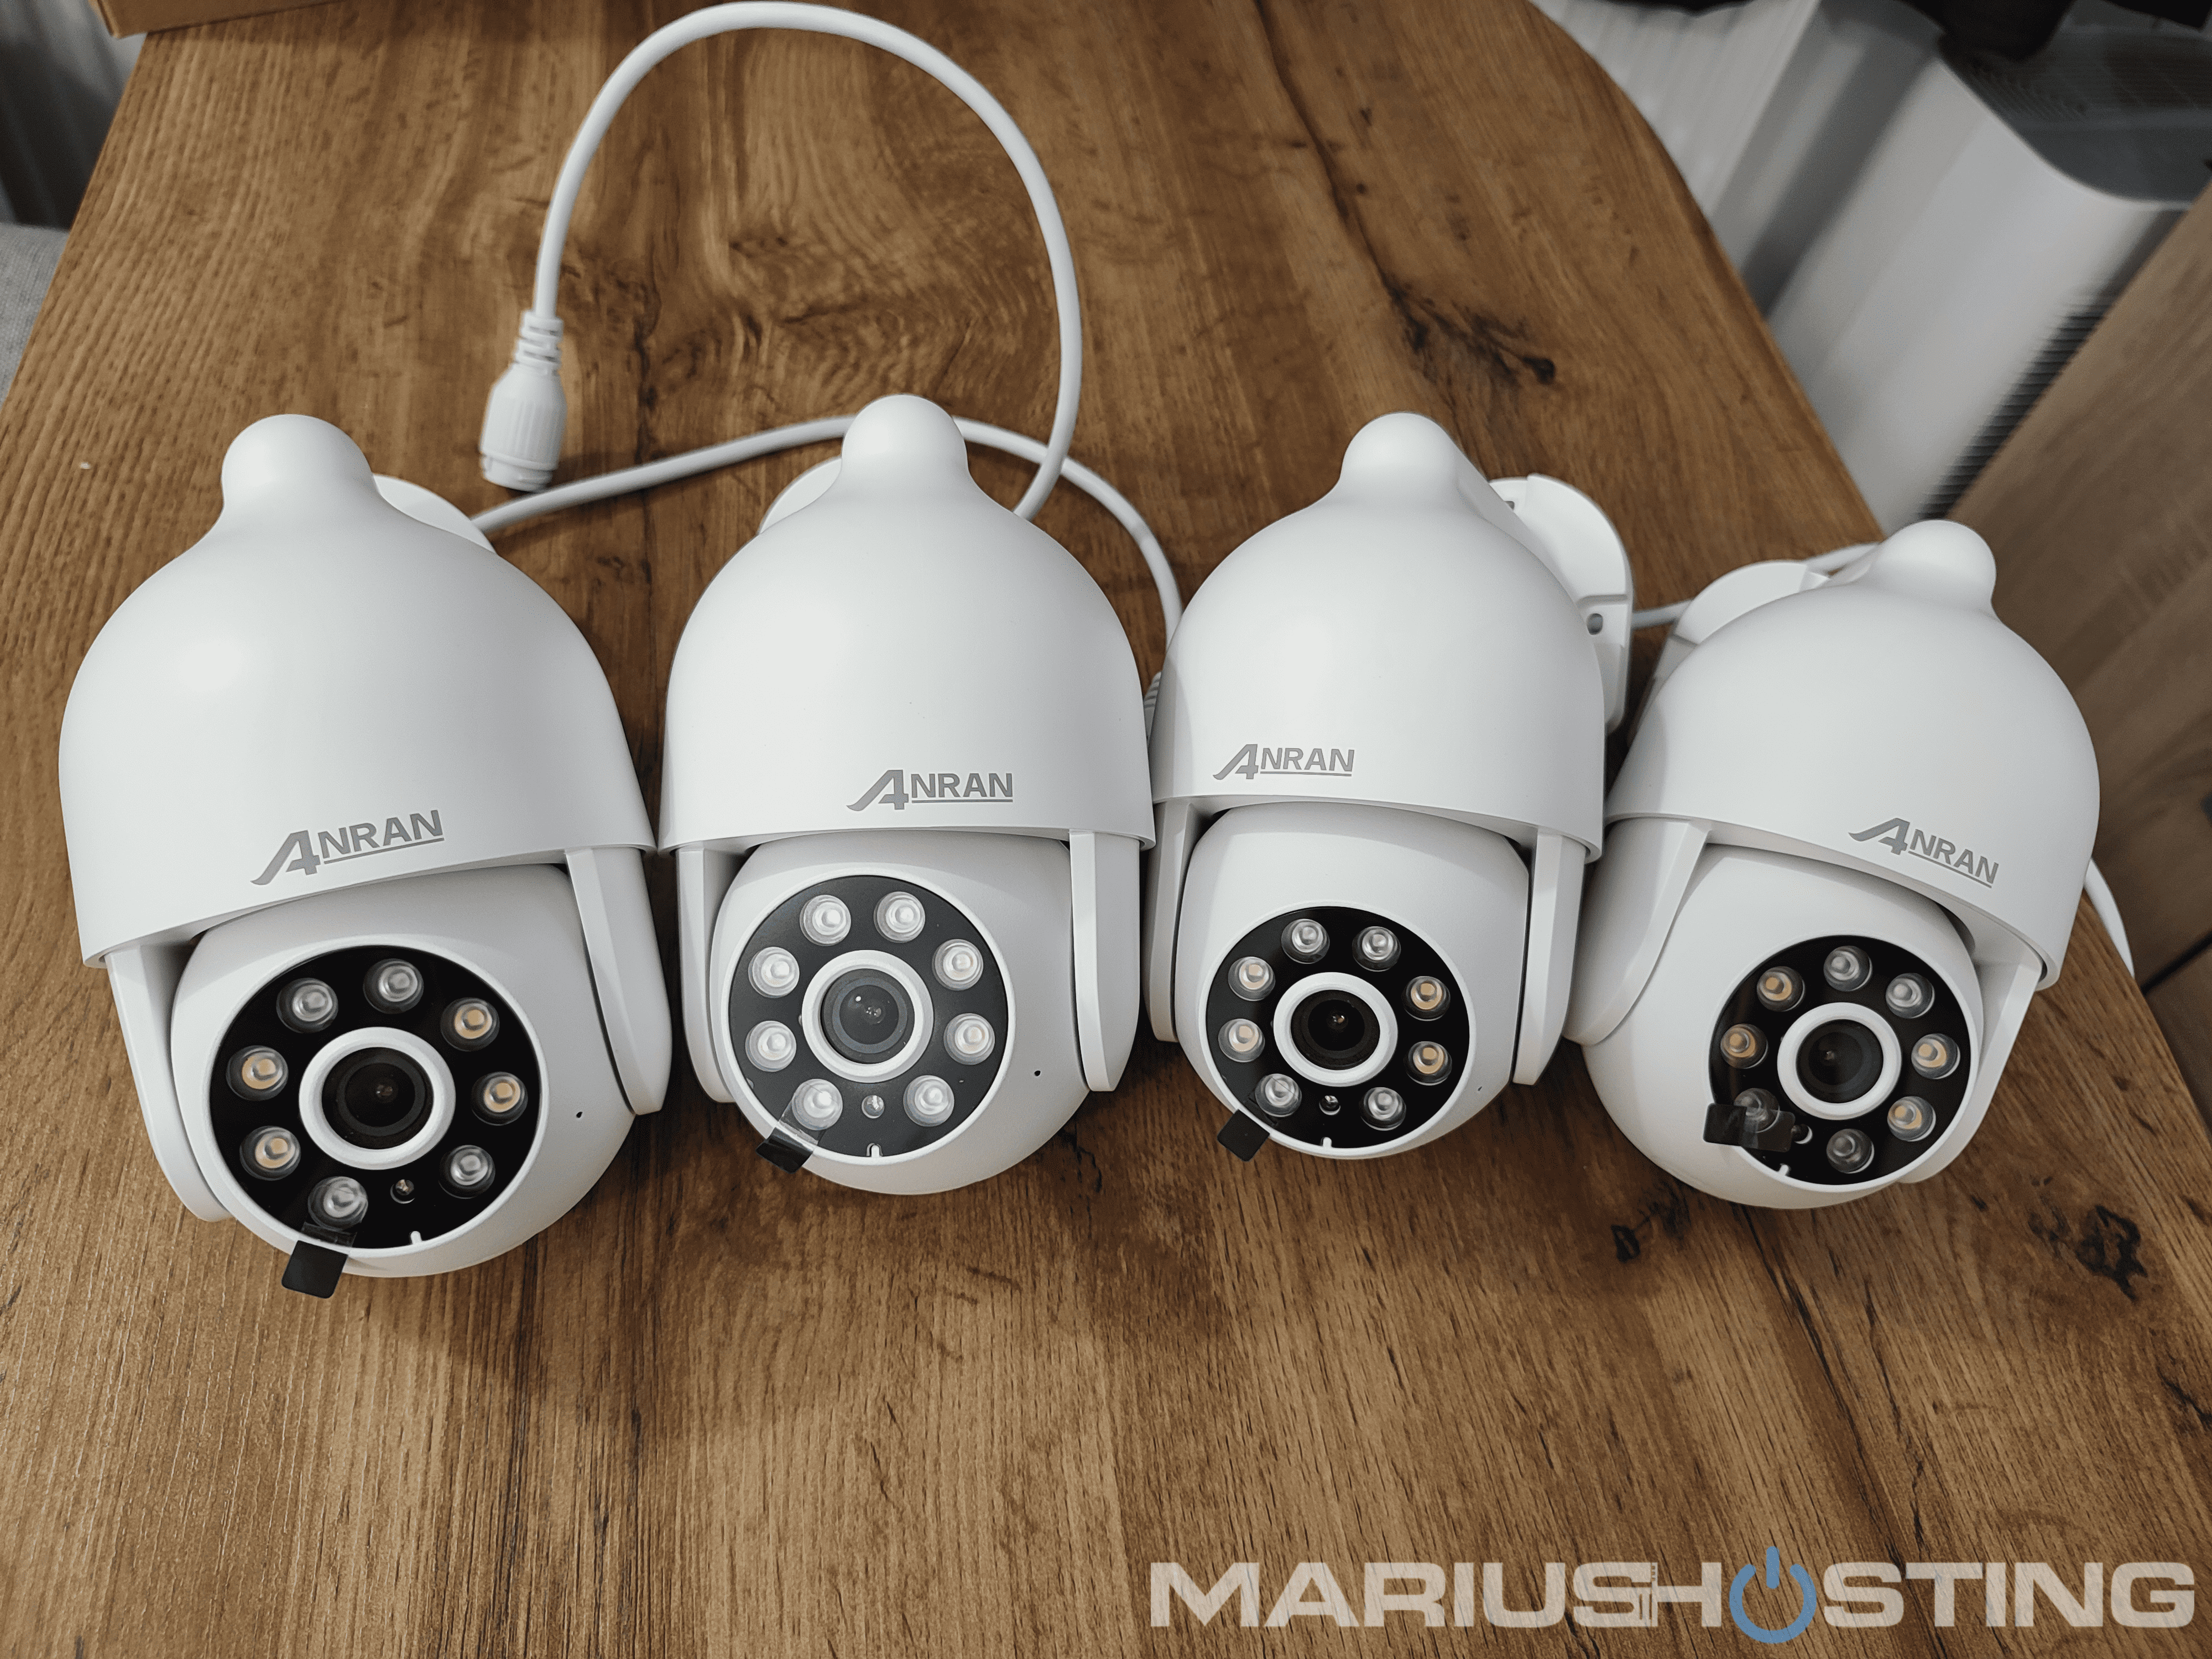 ANRAN 5MP PoE Security Camera Review 5